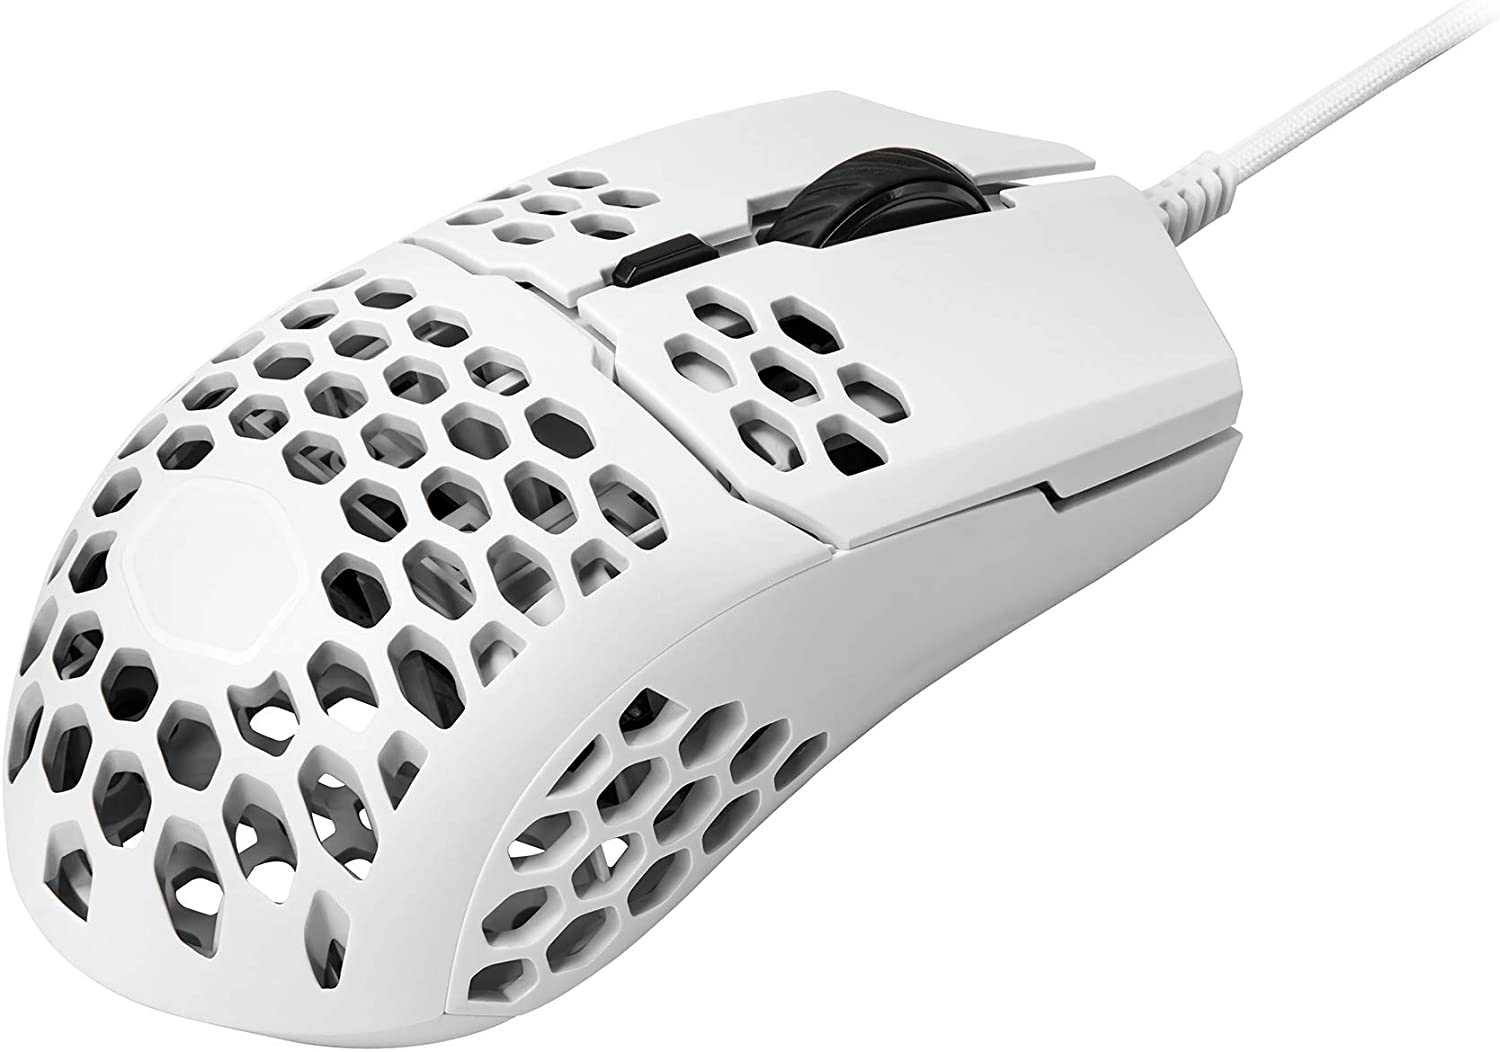 Cooler Master MM720 Lightweight Gaming Mouse - Matte White